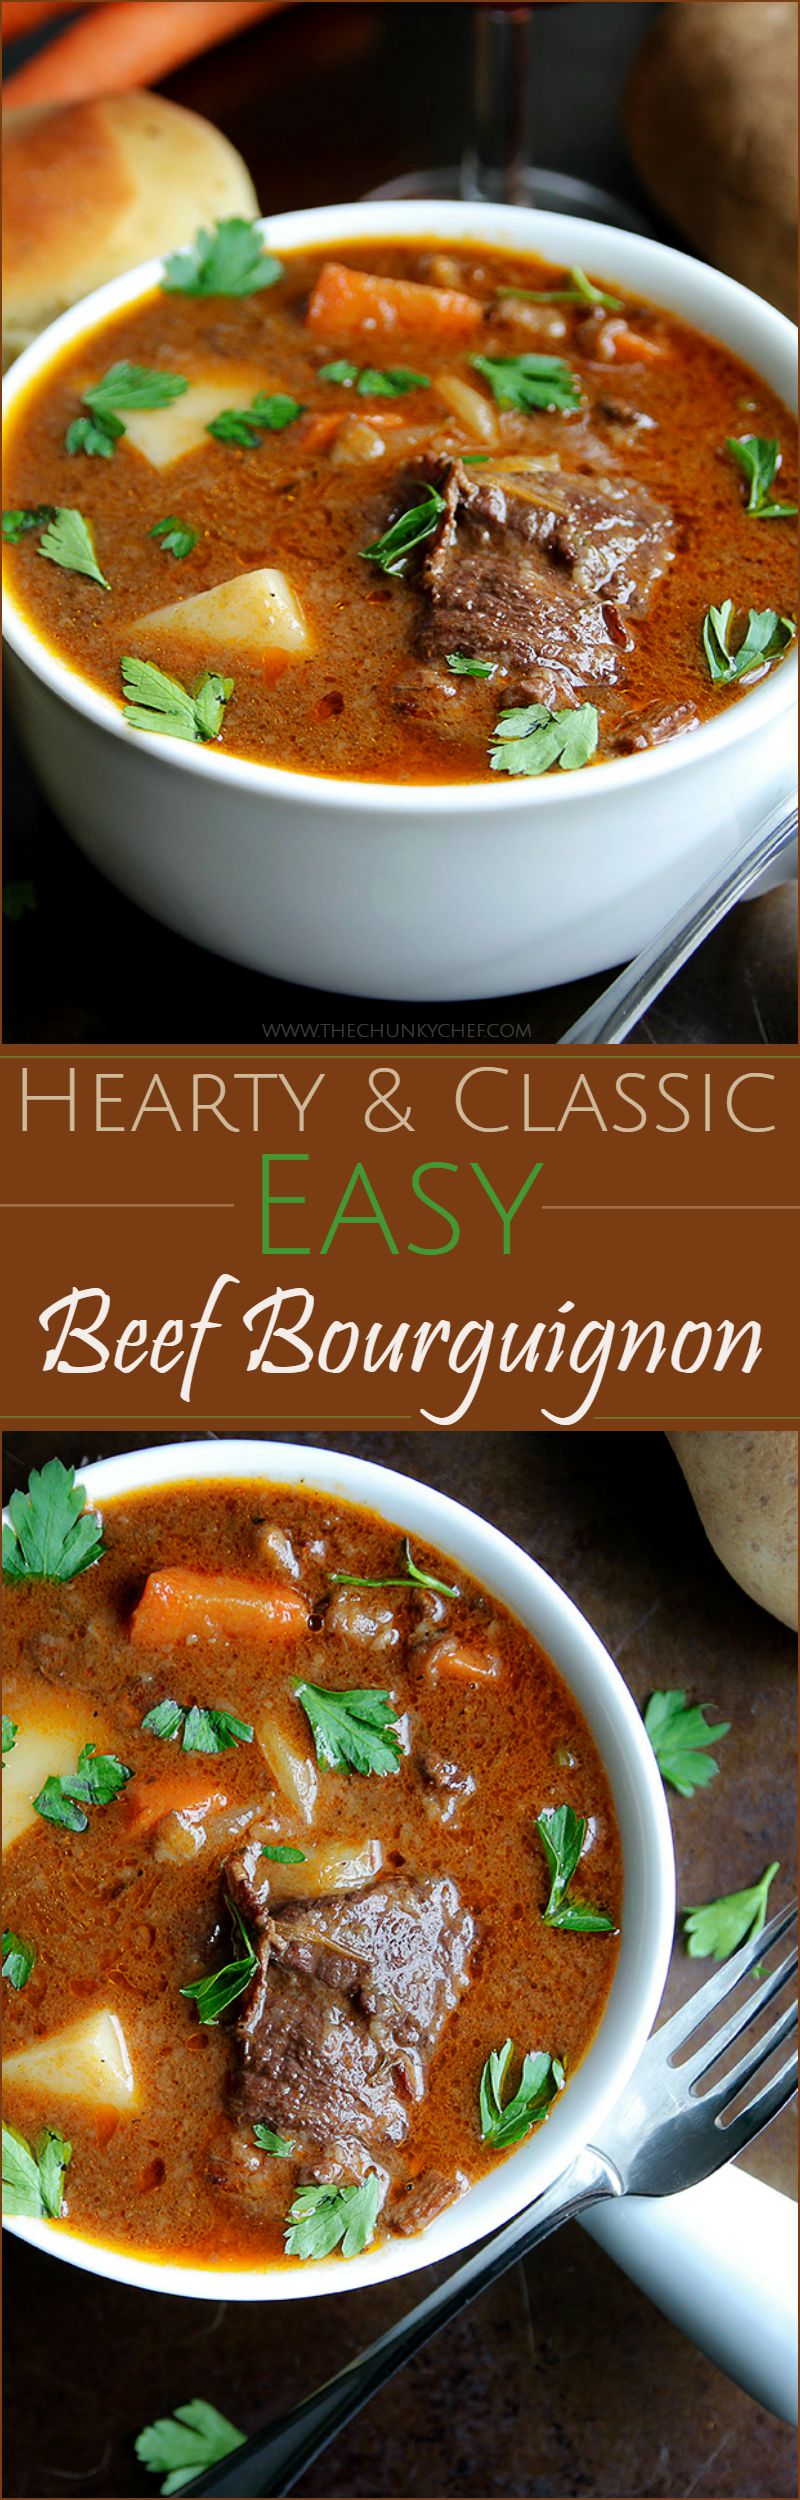 Beef Bourguignon | The Chunky Chef | Such a classic recipe... revamped a little bit and made easy to make for your whole family. Try this beef bourguignon soon!